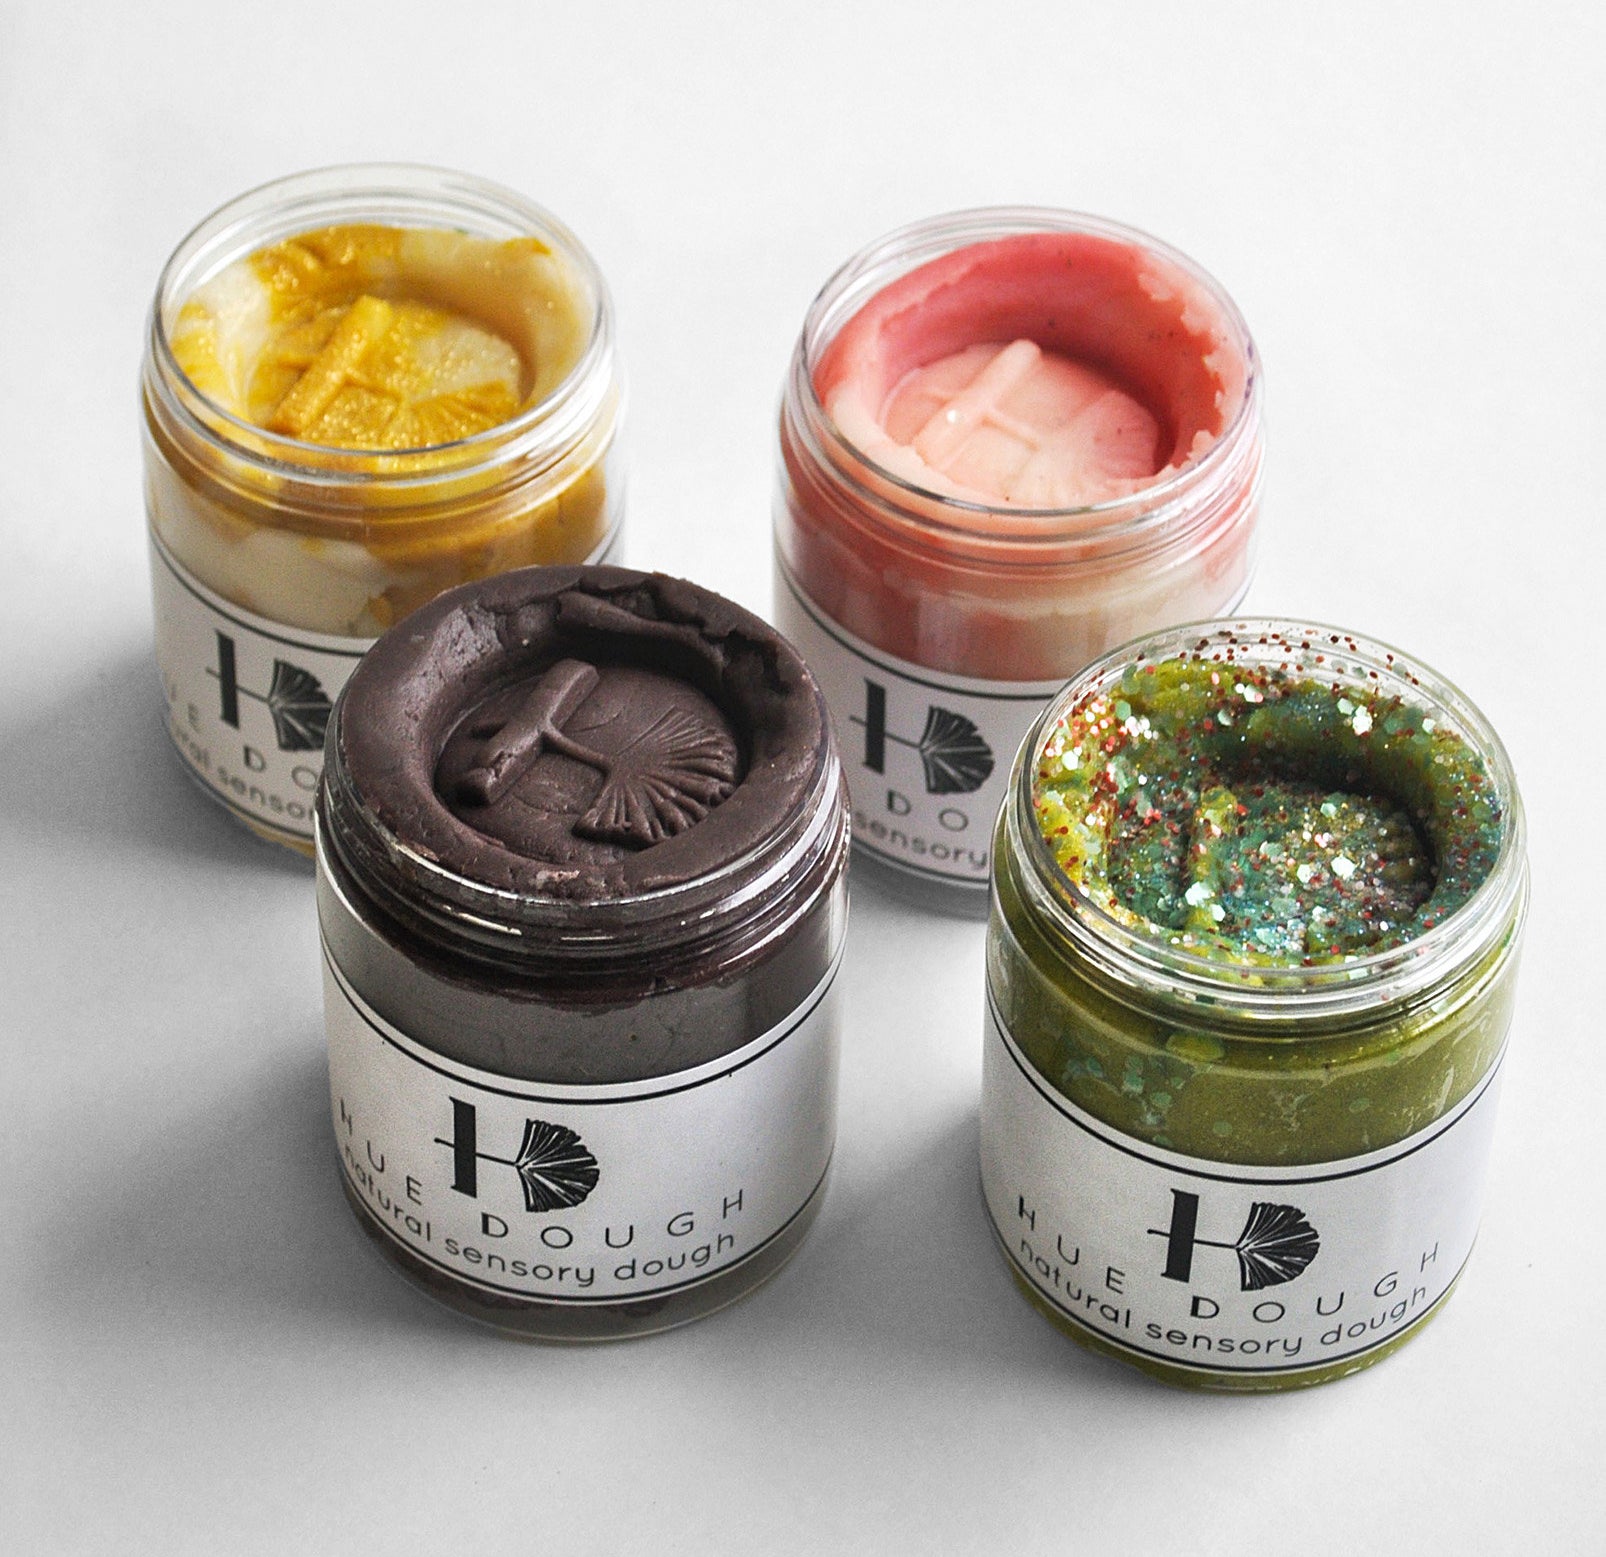 A set of four jars of sensory dough, each in a different colour